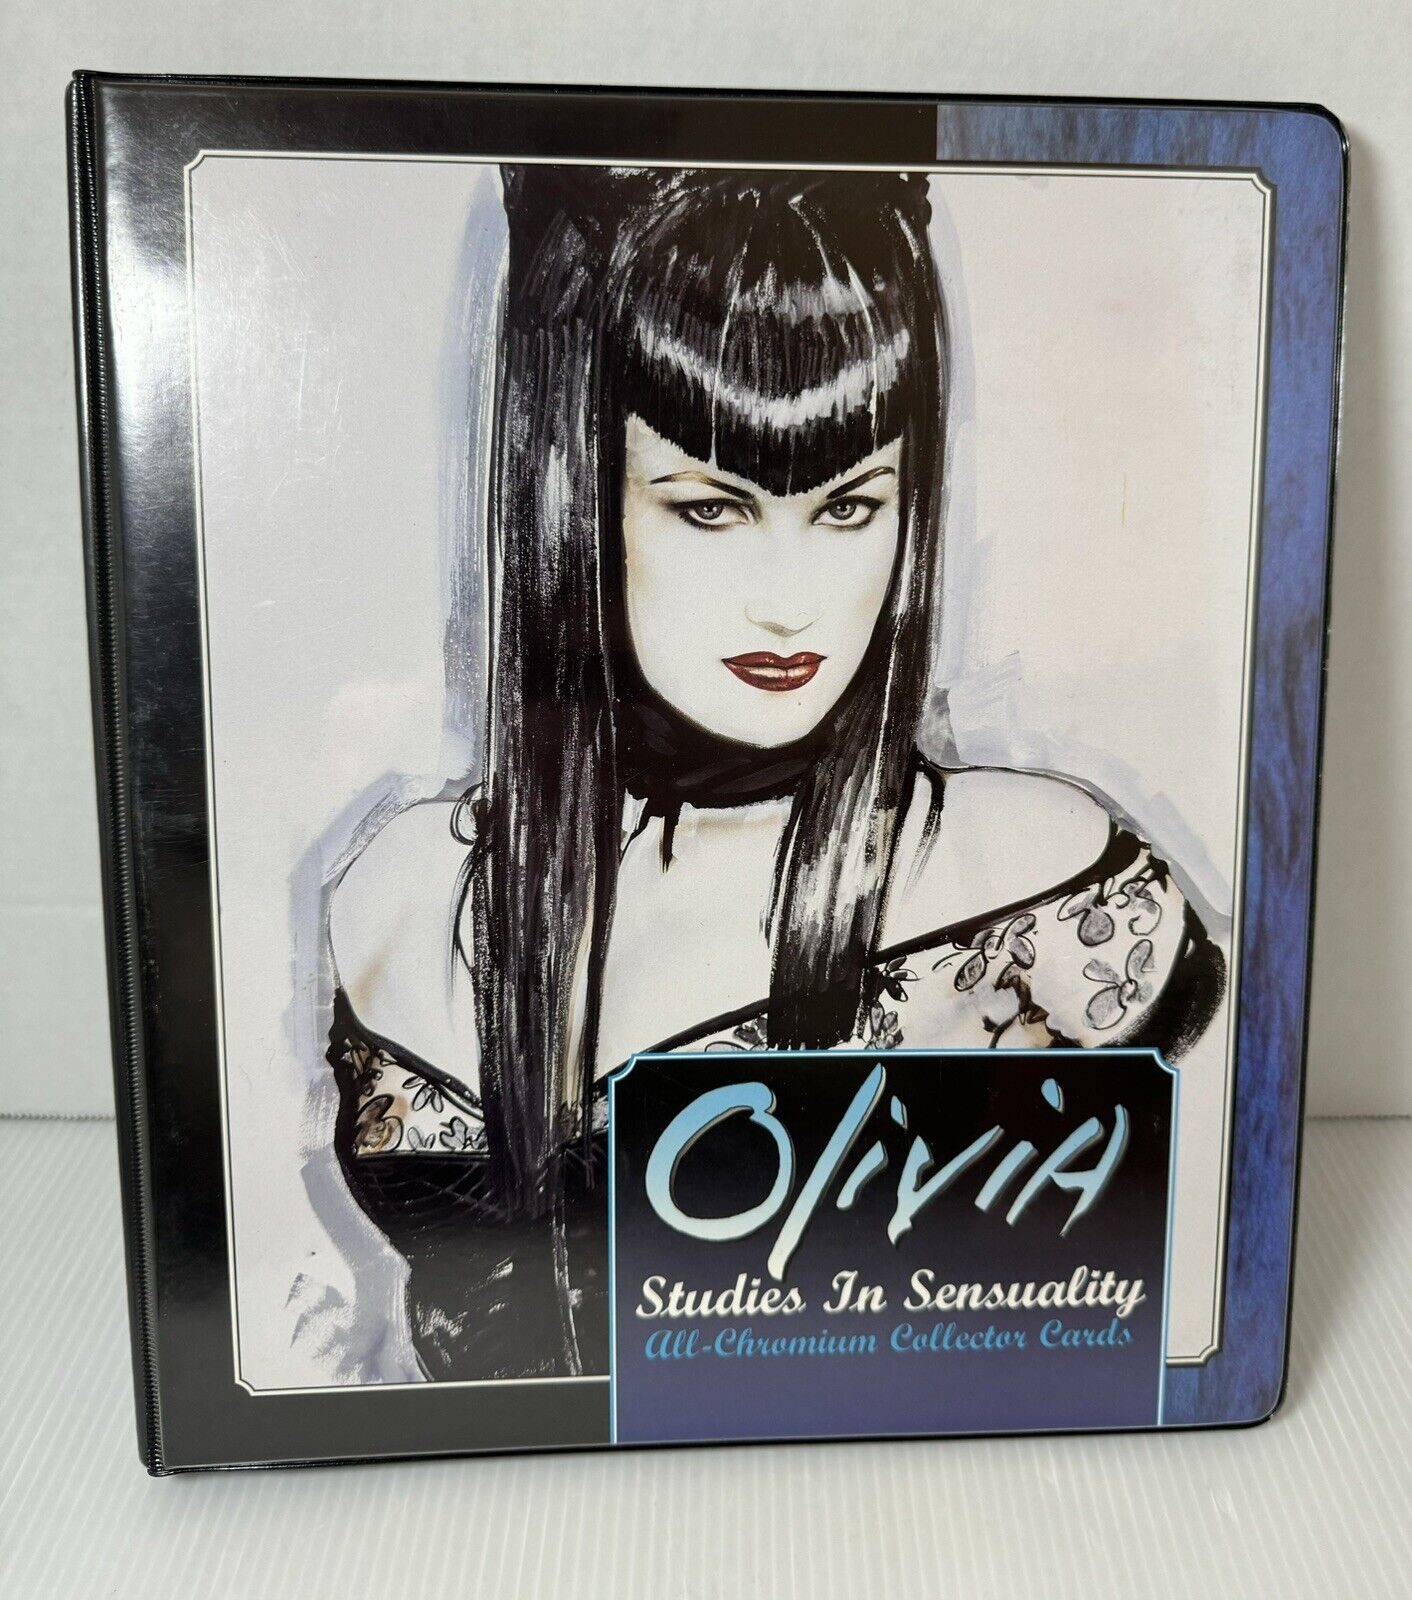 Olivia Studies In Sensuality Binder & All-Chromium Collector Cards Lot of 85 95’